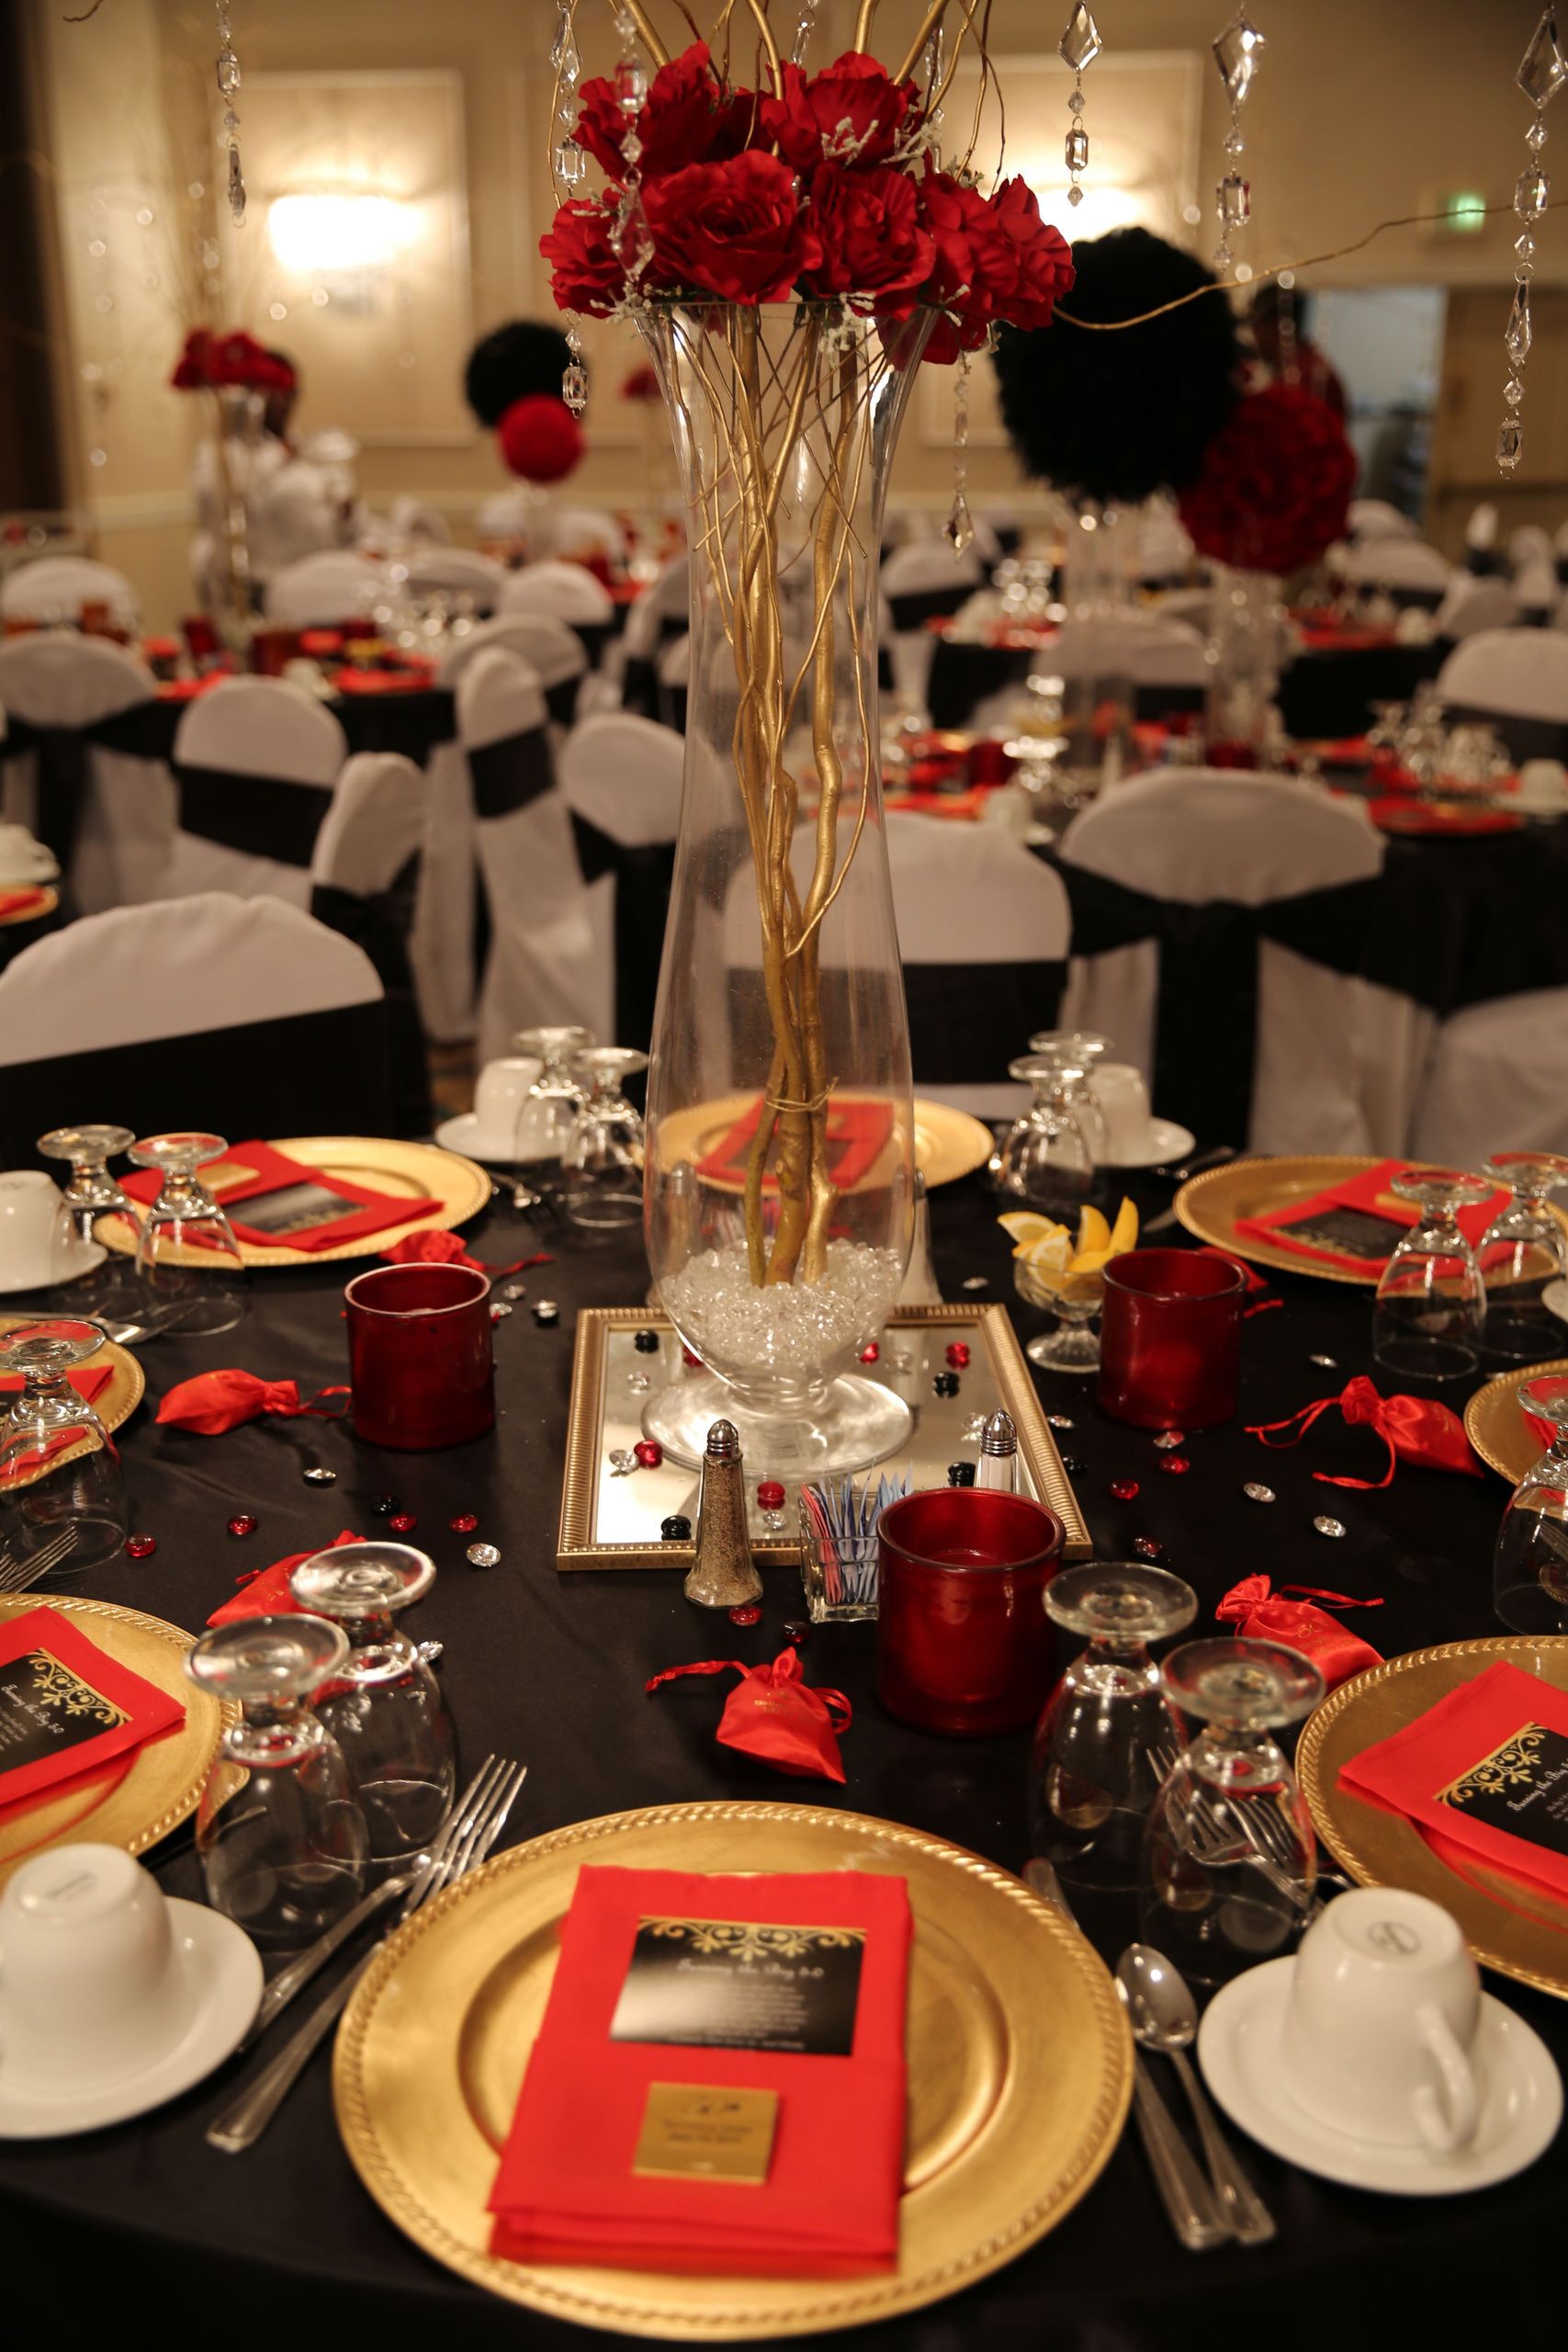 50th Birthday Party Decoration Ideas
 Red black and gold table decorations for 50th birthday